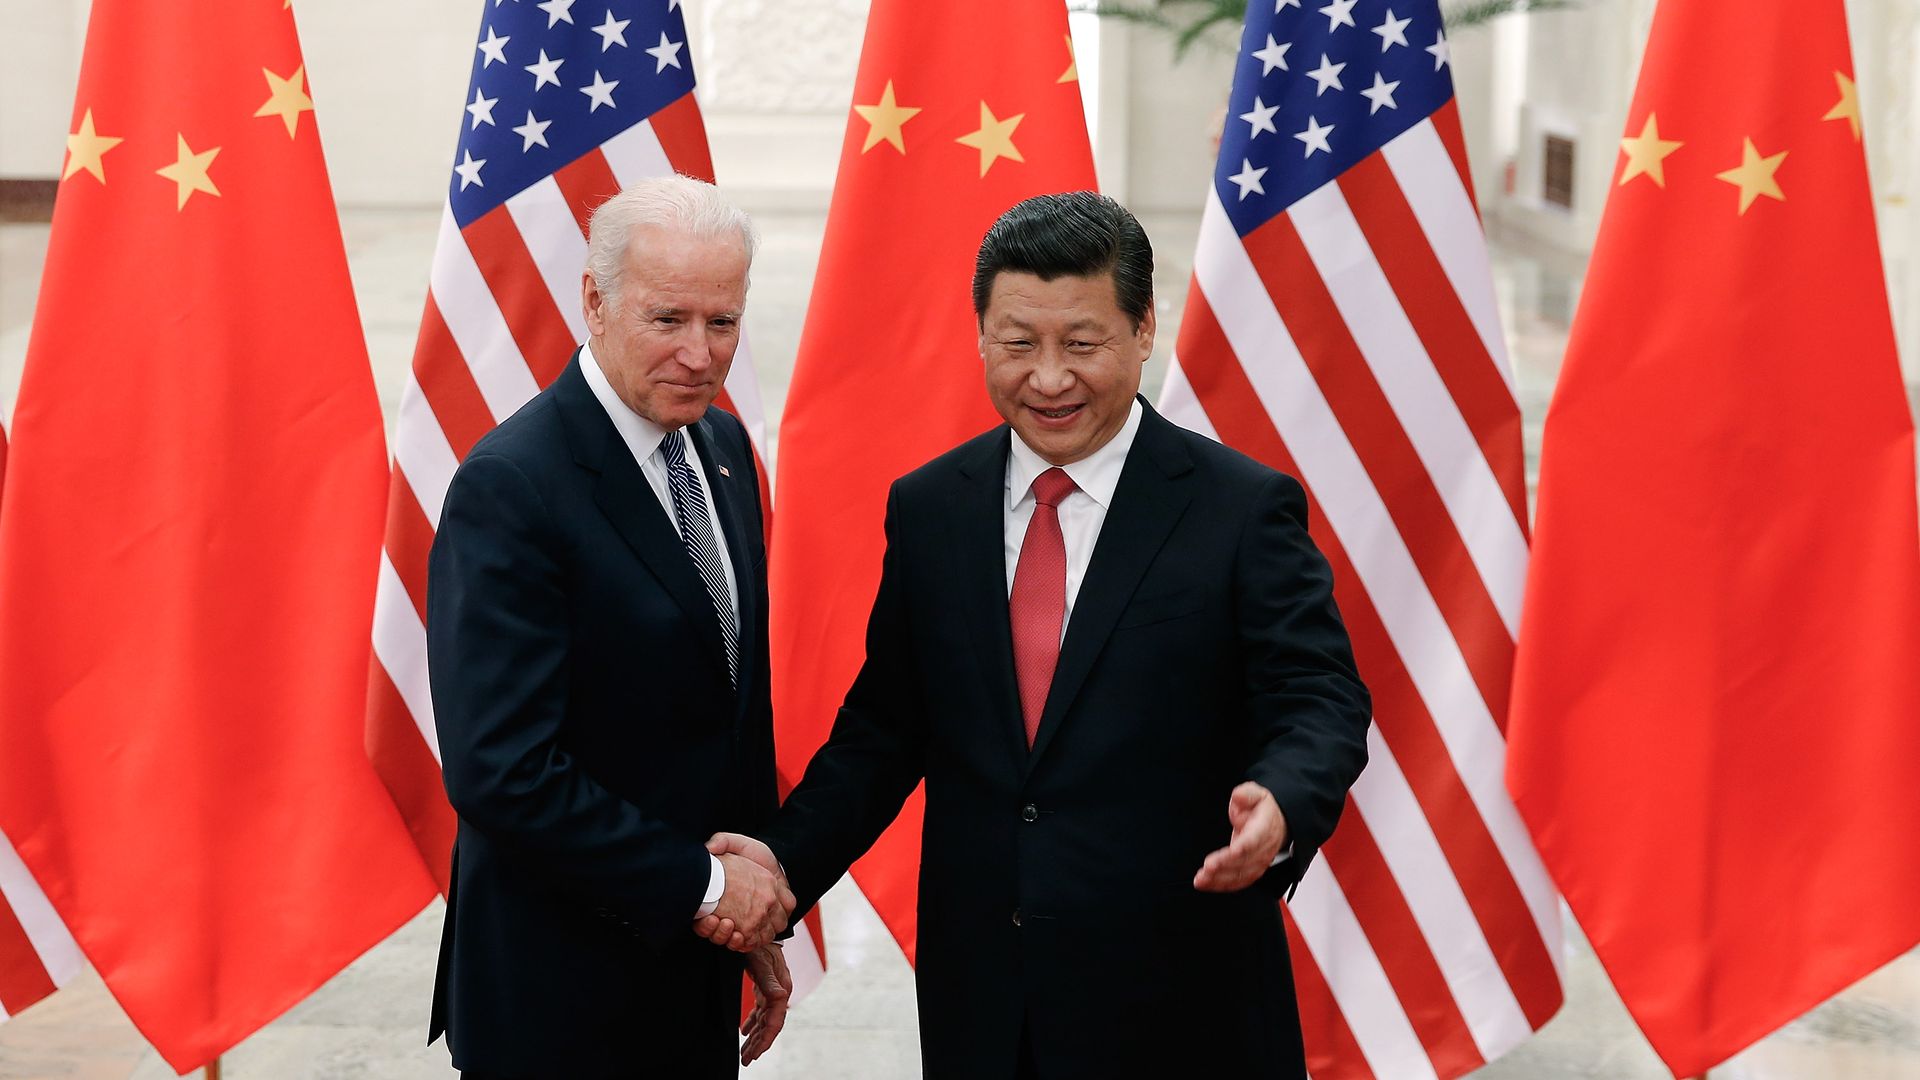 Photo of Joe Biden shaking hands with Xi Jinping with Chinese and American flags in the background